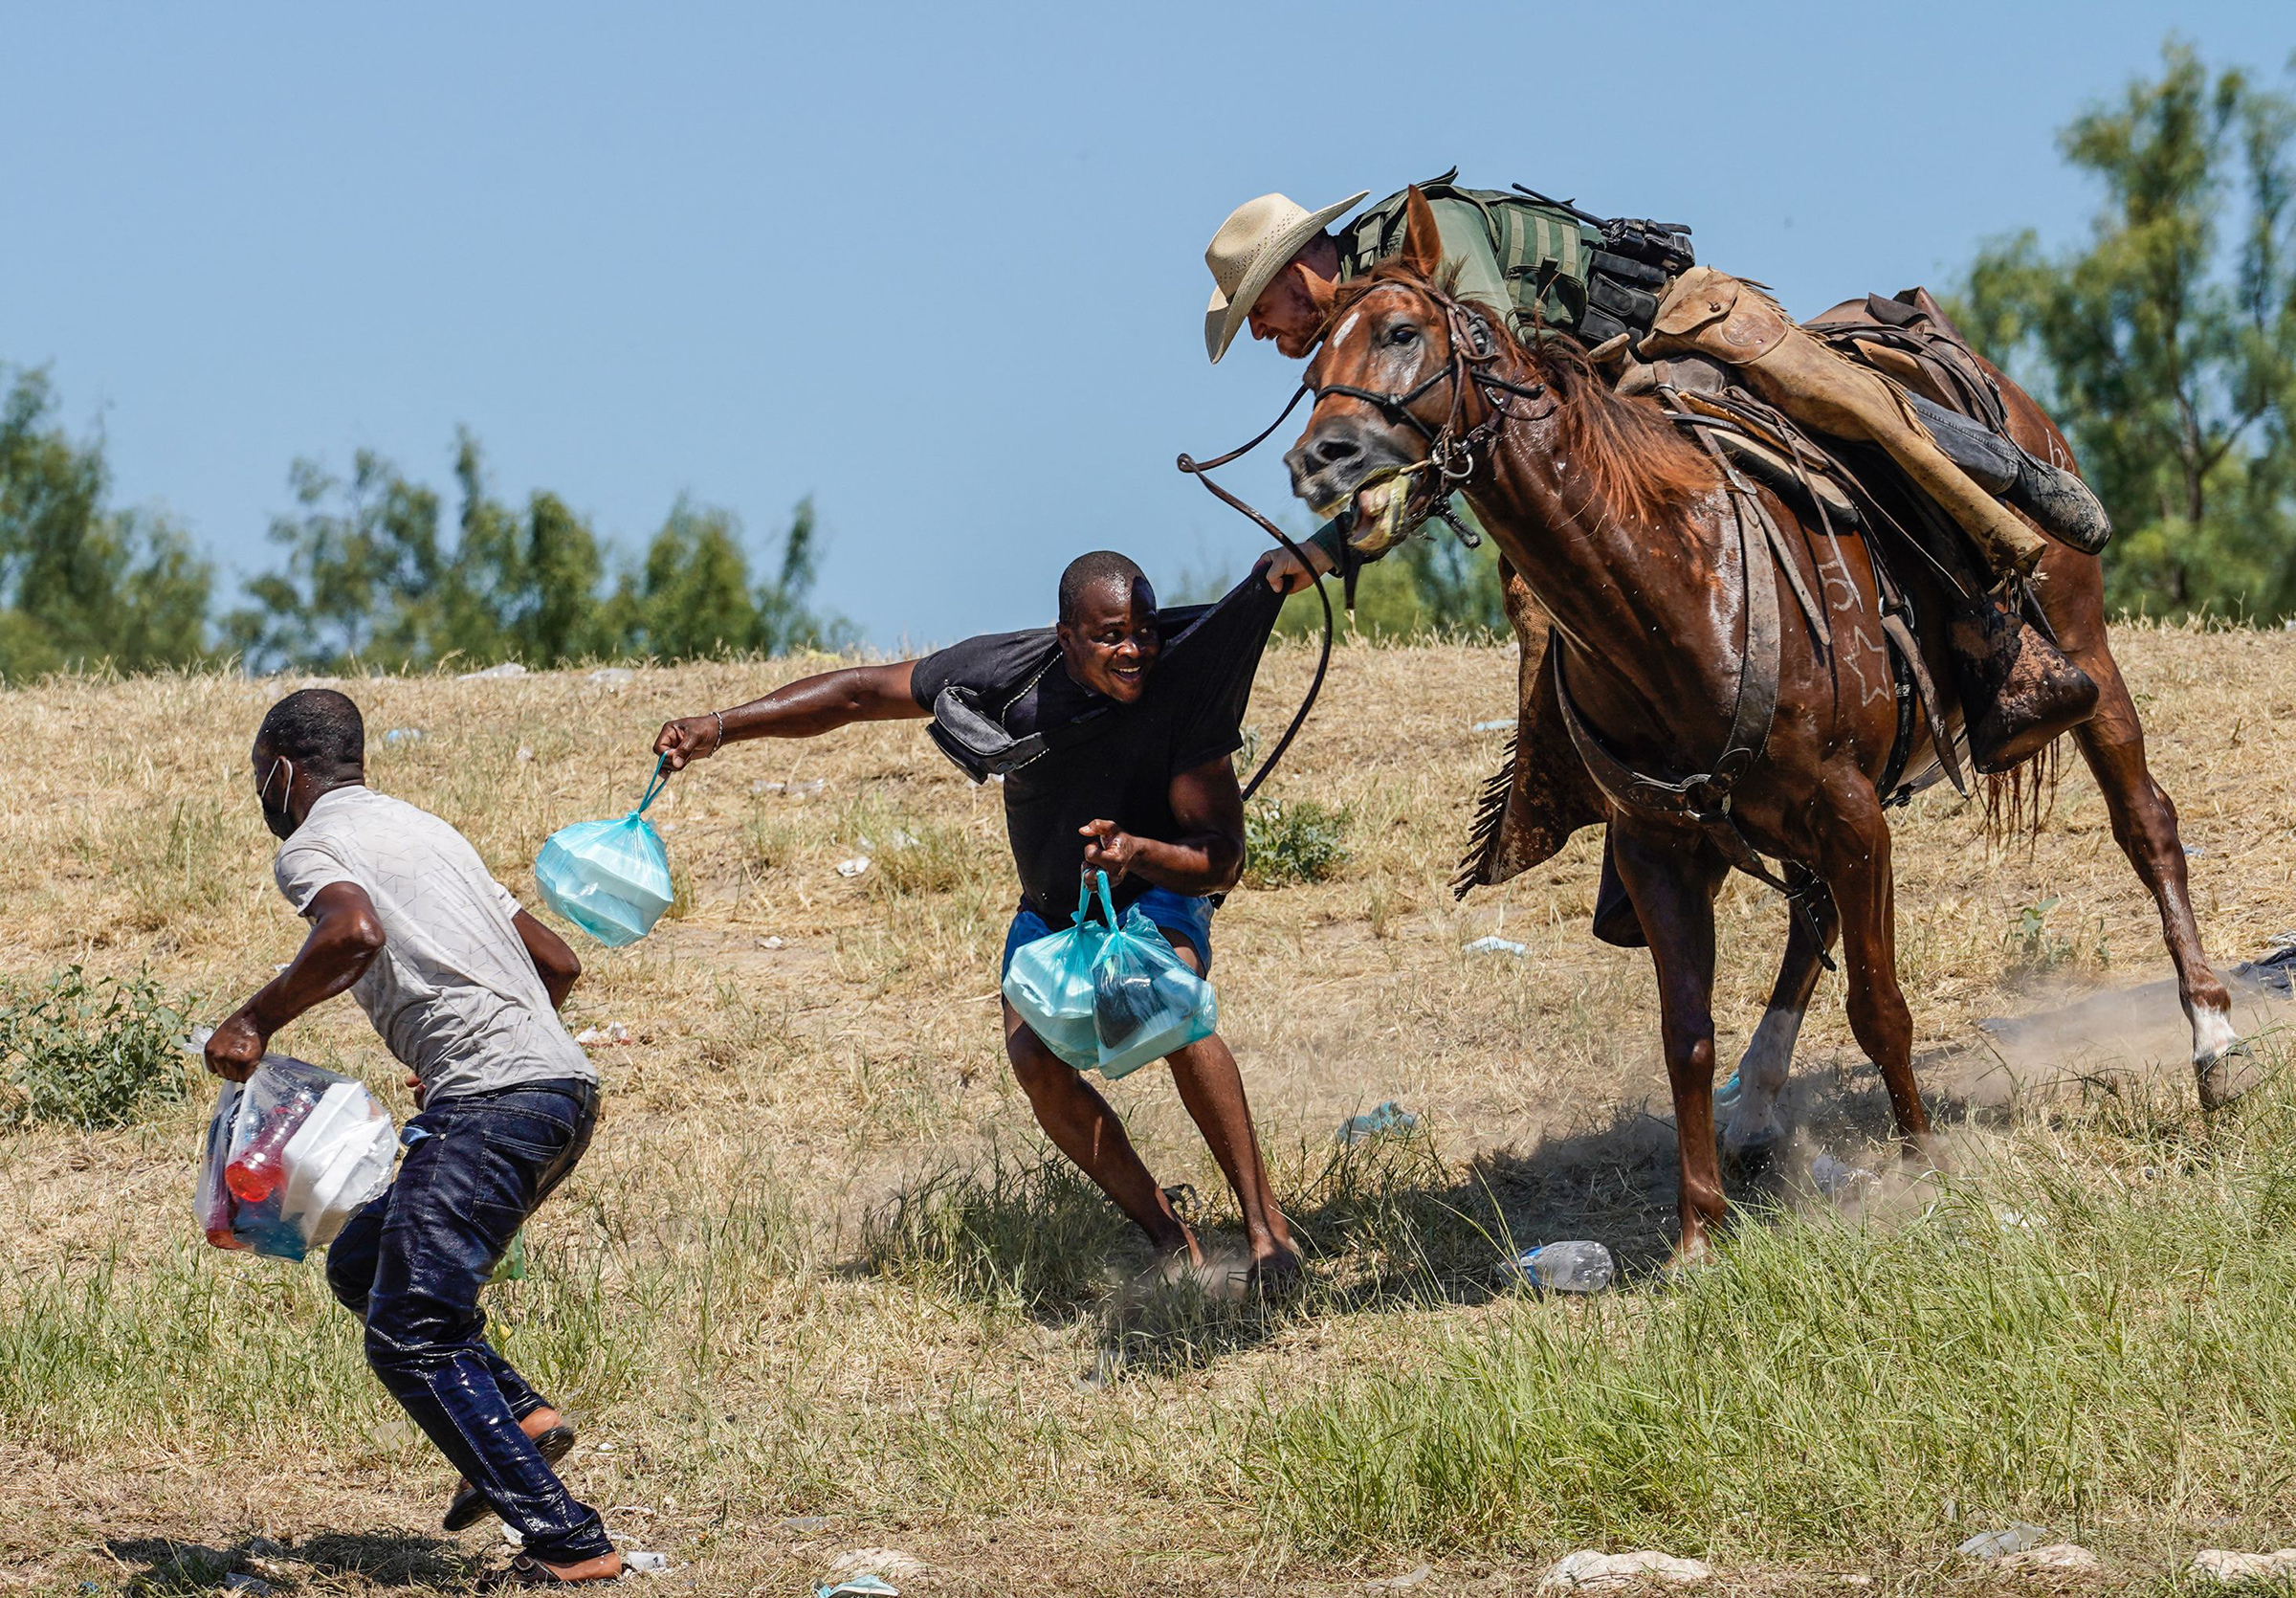 A U.S. Border Patrol agent grabs the shirt of a Haitian man while trying to stop migrants at the U.S.-Mexico border from crossing into Texas, on Sept. 19. Images of mounted agents chasing migrants and brandishing whiplike reins prompted the White House to label the scenes “horrific.” The Department of Homeland Security is investigating.